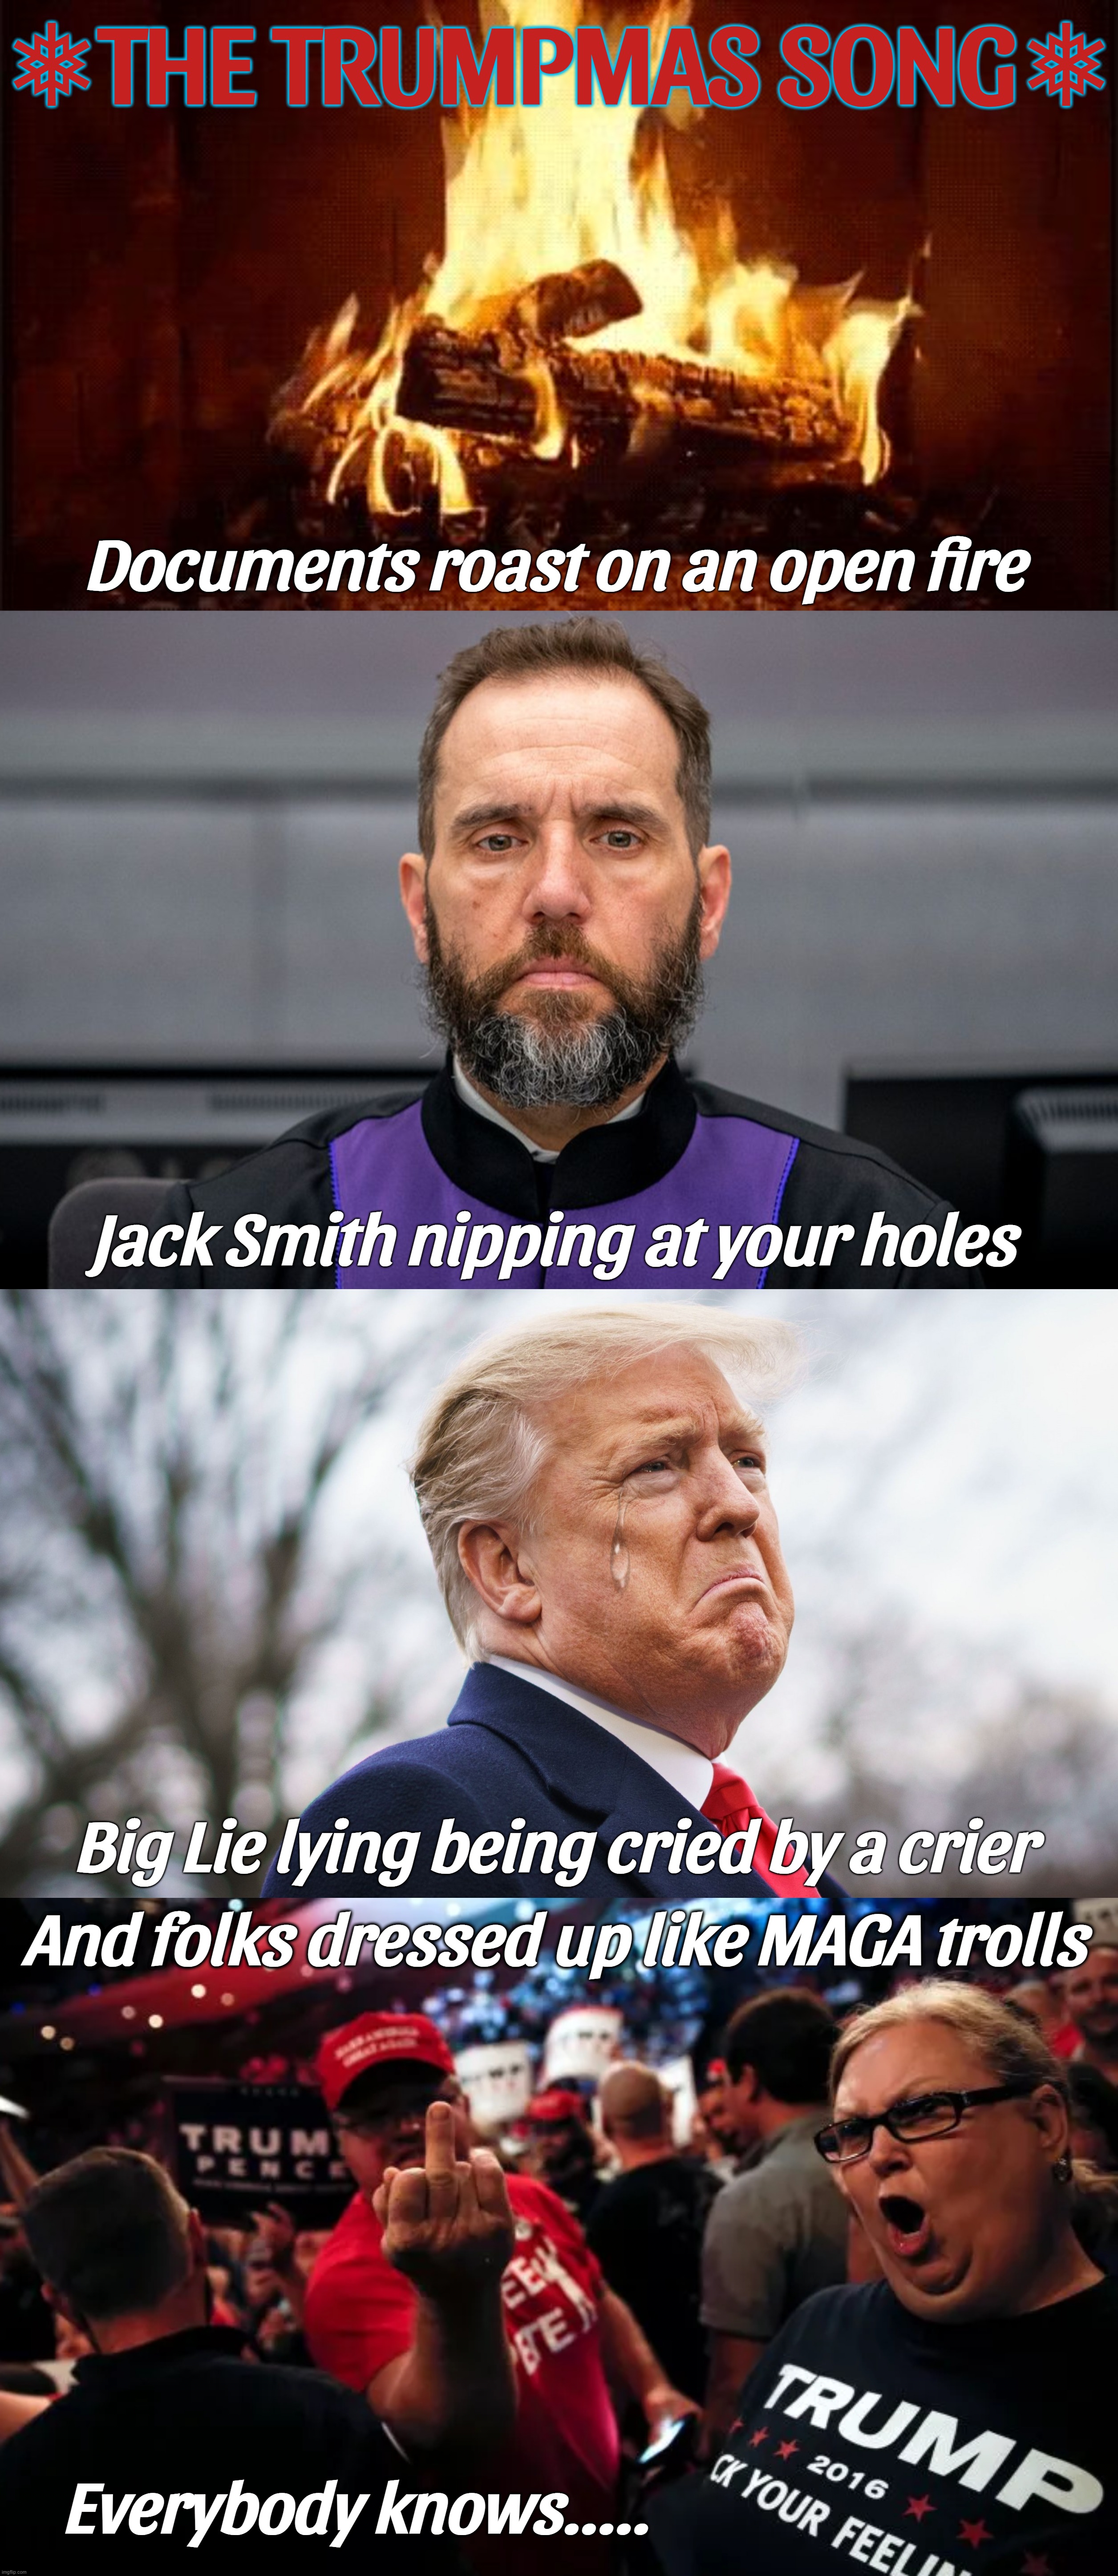 ❅THE TRUMPMAS SONG❅; Documents roast on an open fire; Jack Smith nipping at your holes; Big Lie lying being cried by a crier; And folks dressed up like MAGA trolls; Everybody knows..... | image tagged in fire place,jack smith,crying baby | made w/ Imgflip meme maker